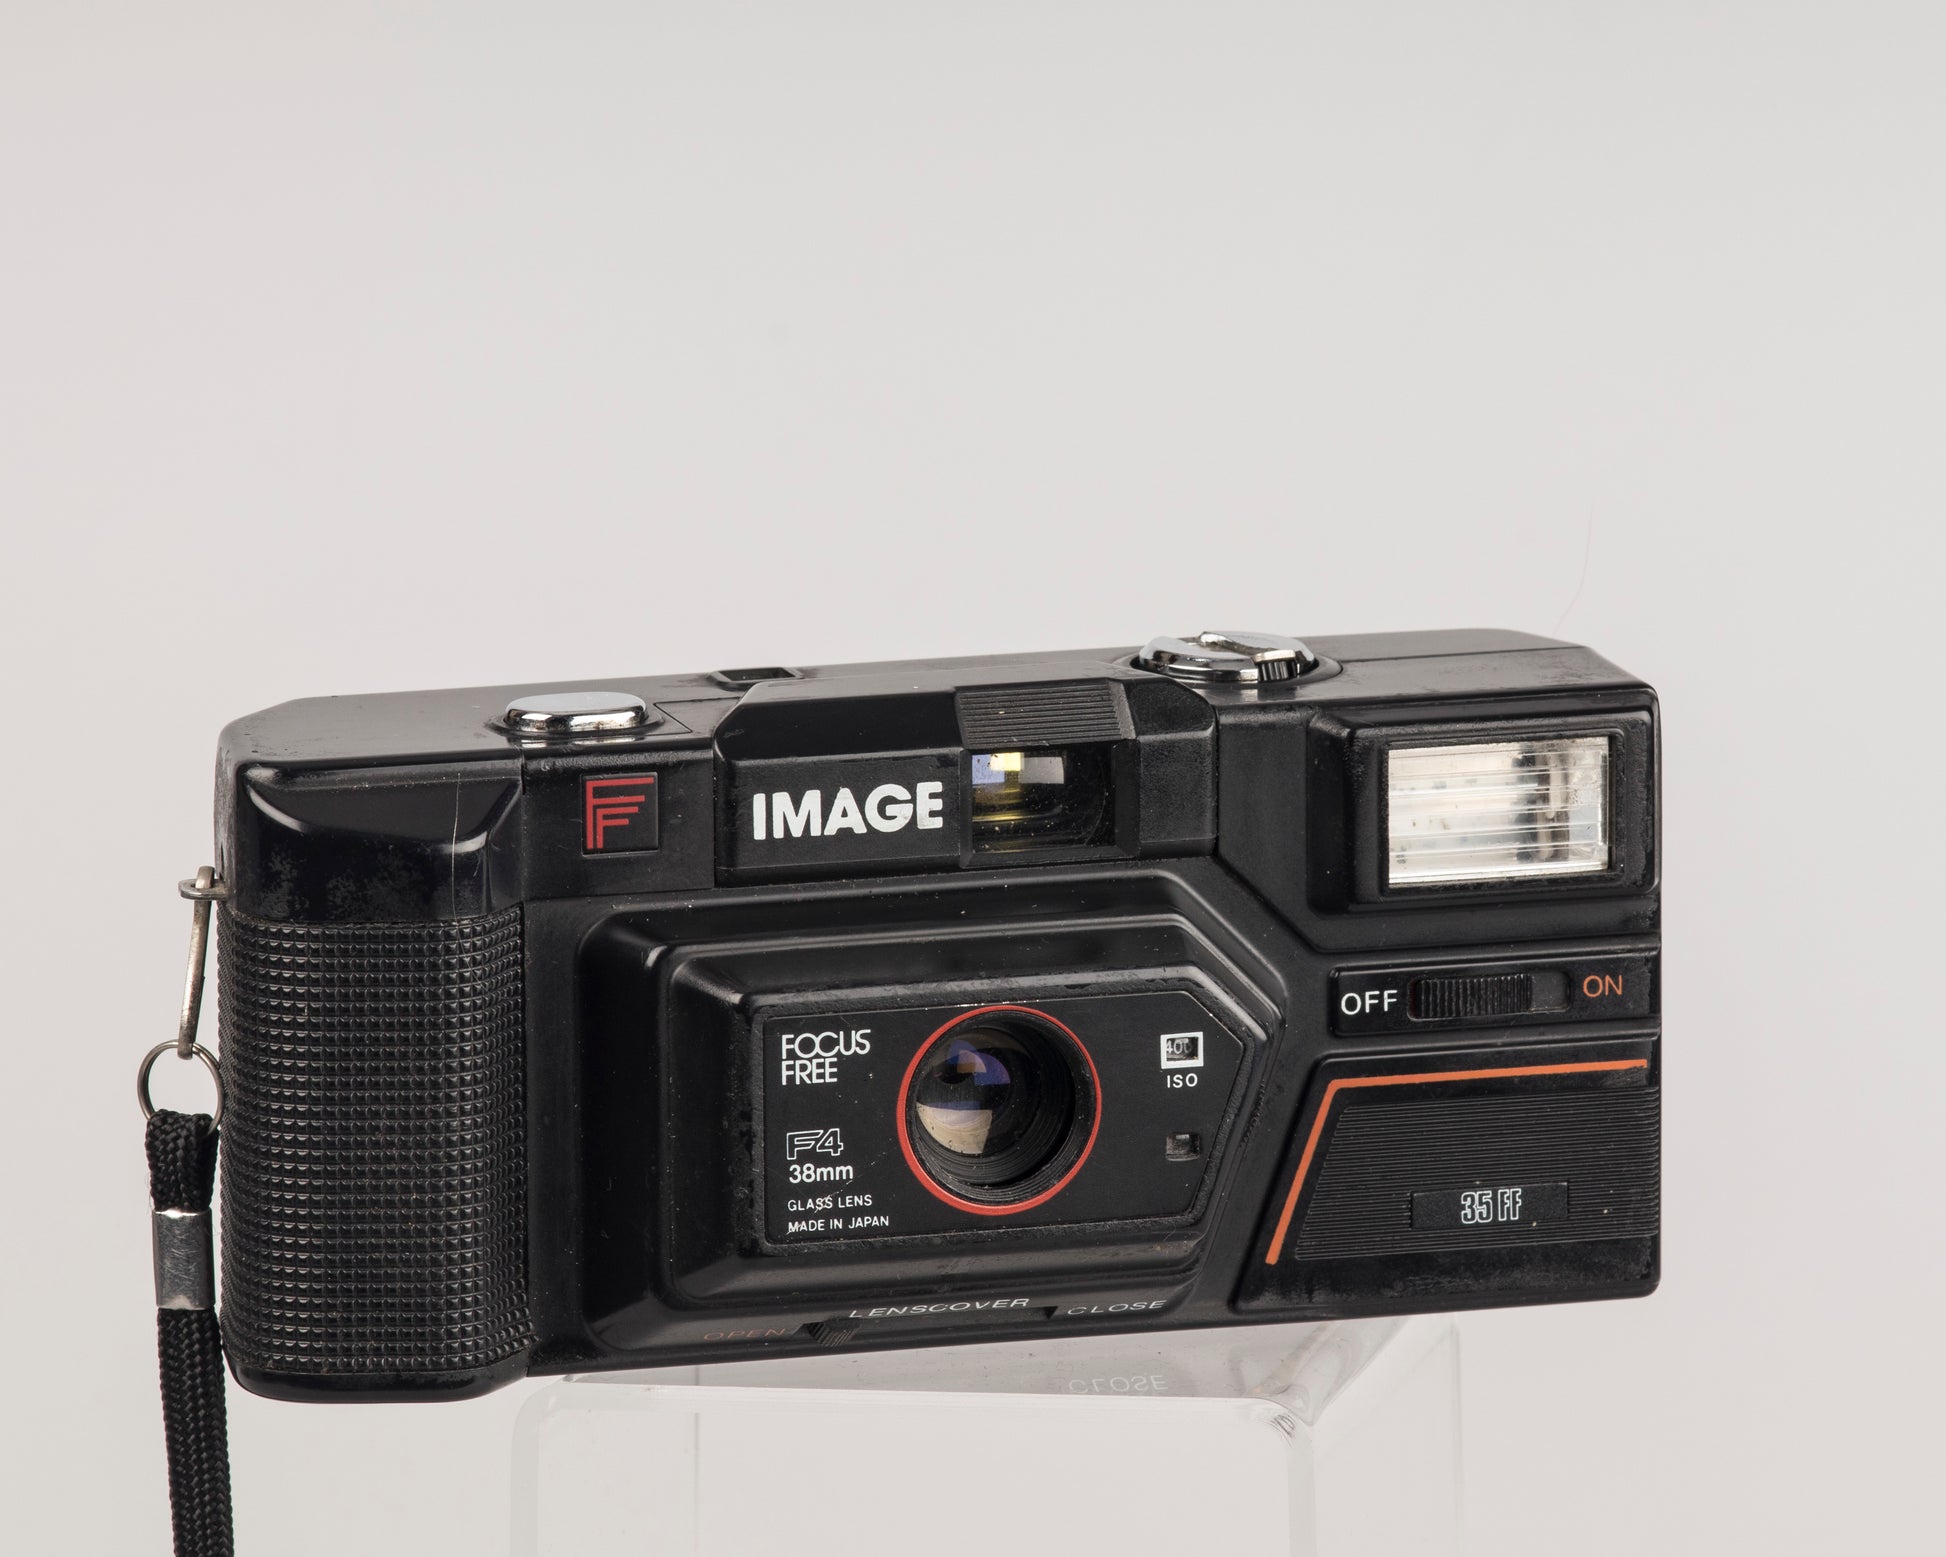 This is the Image 35FF focus free camera. It was also sold as the Premier PC-500 and the Fotorama PC-500